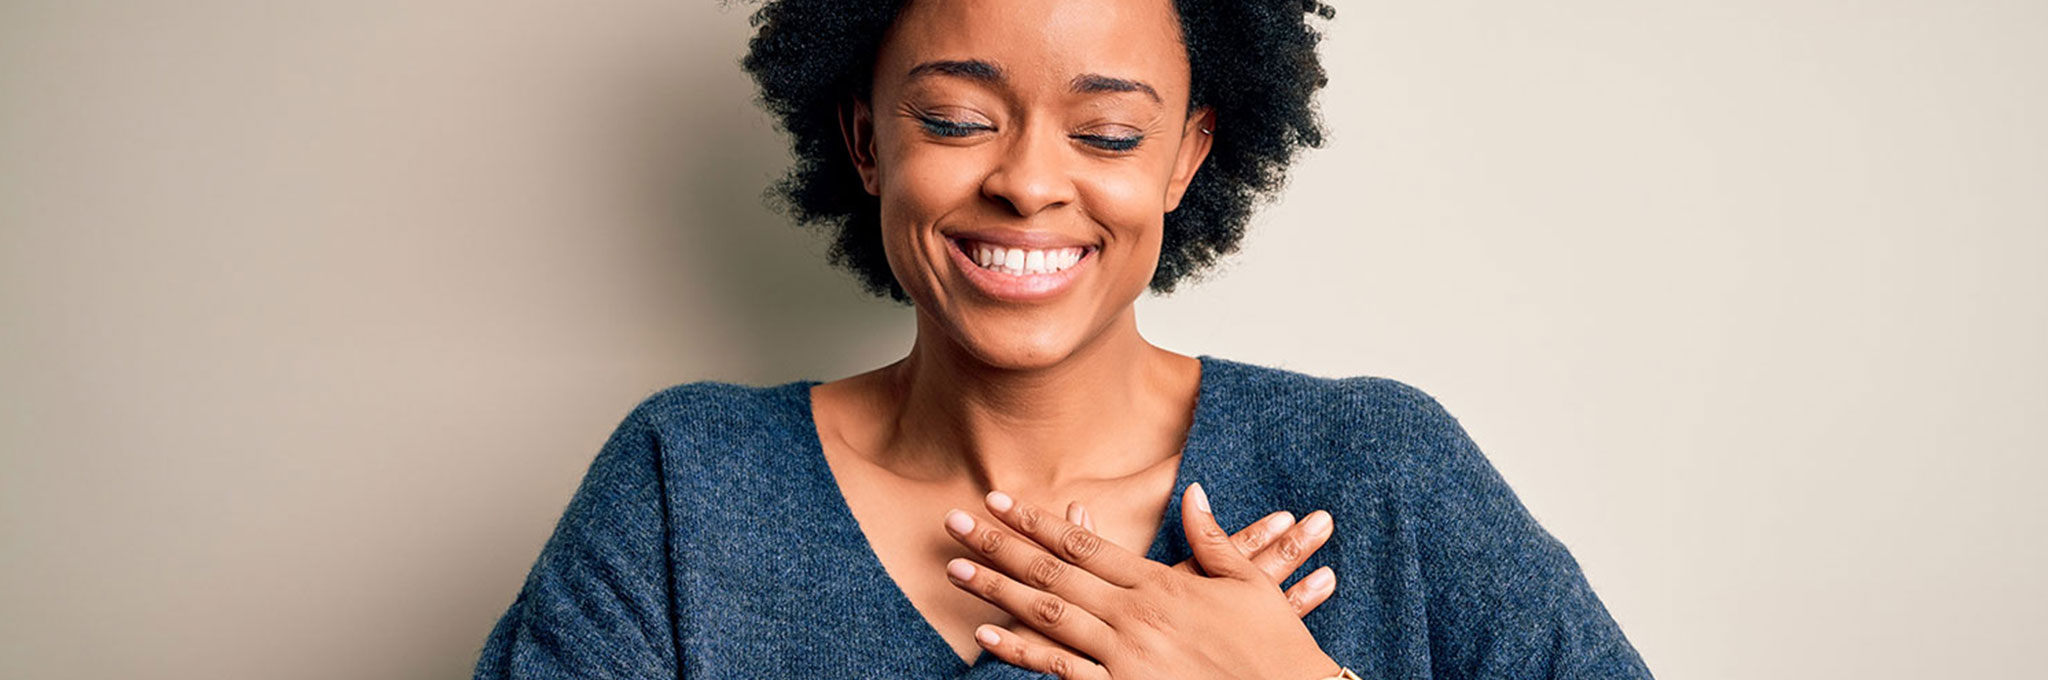 Woman smiling with hands over heart